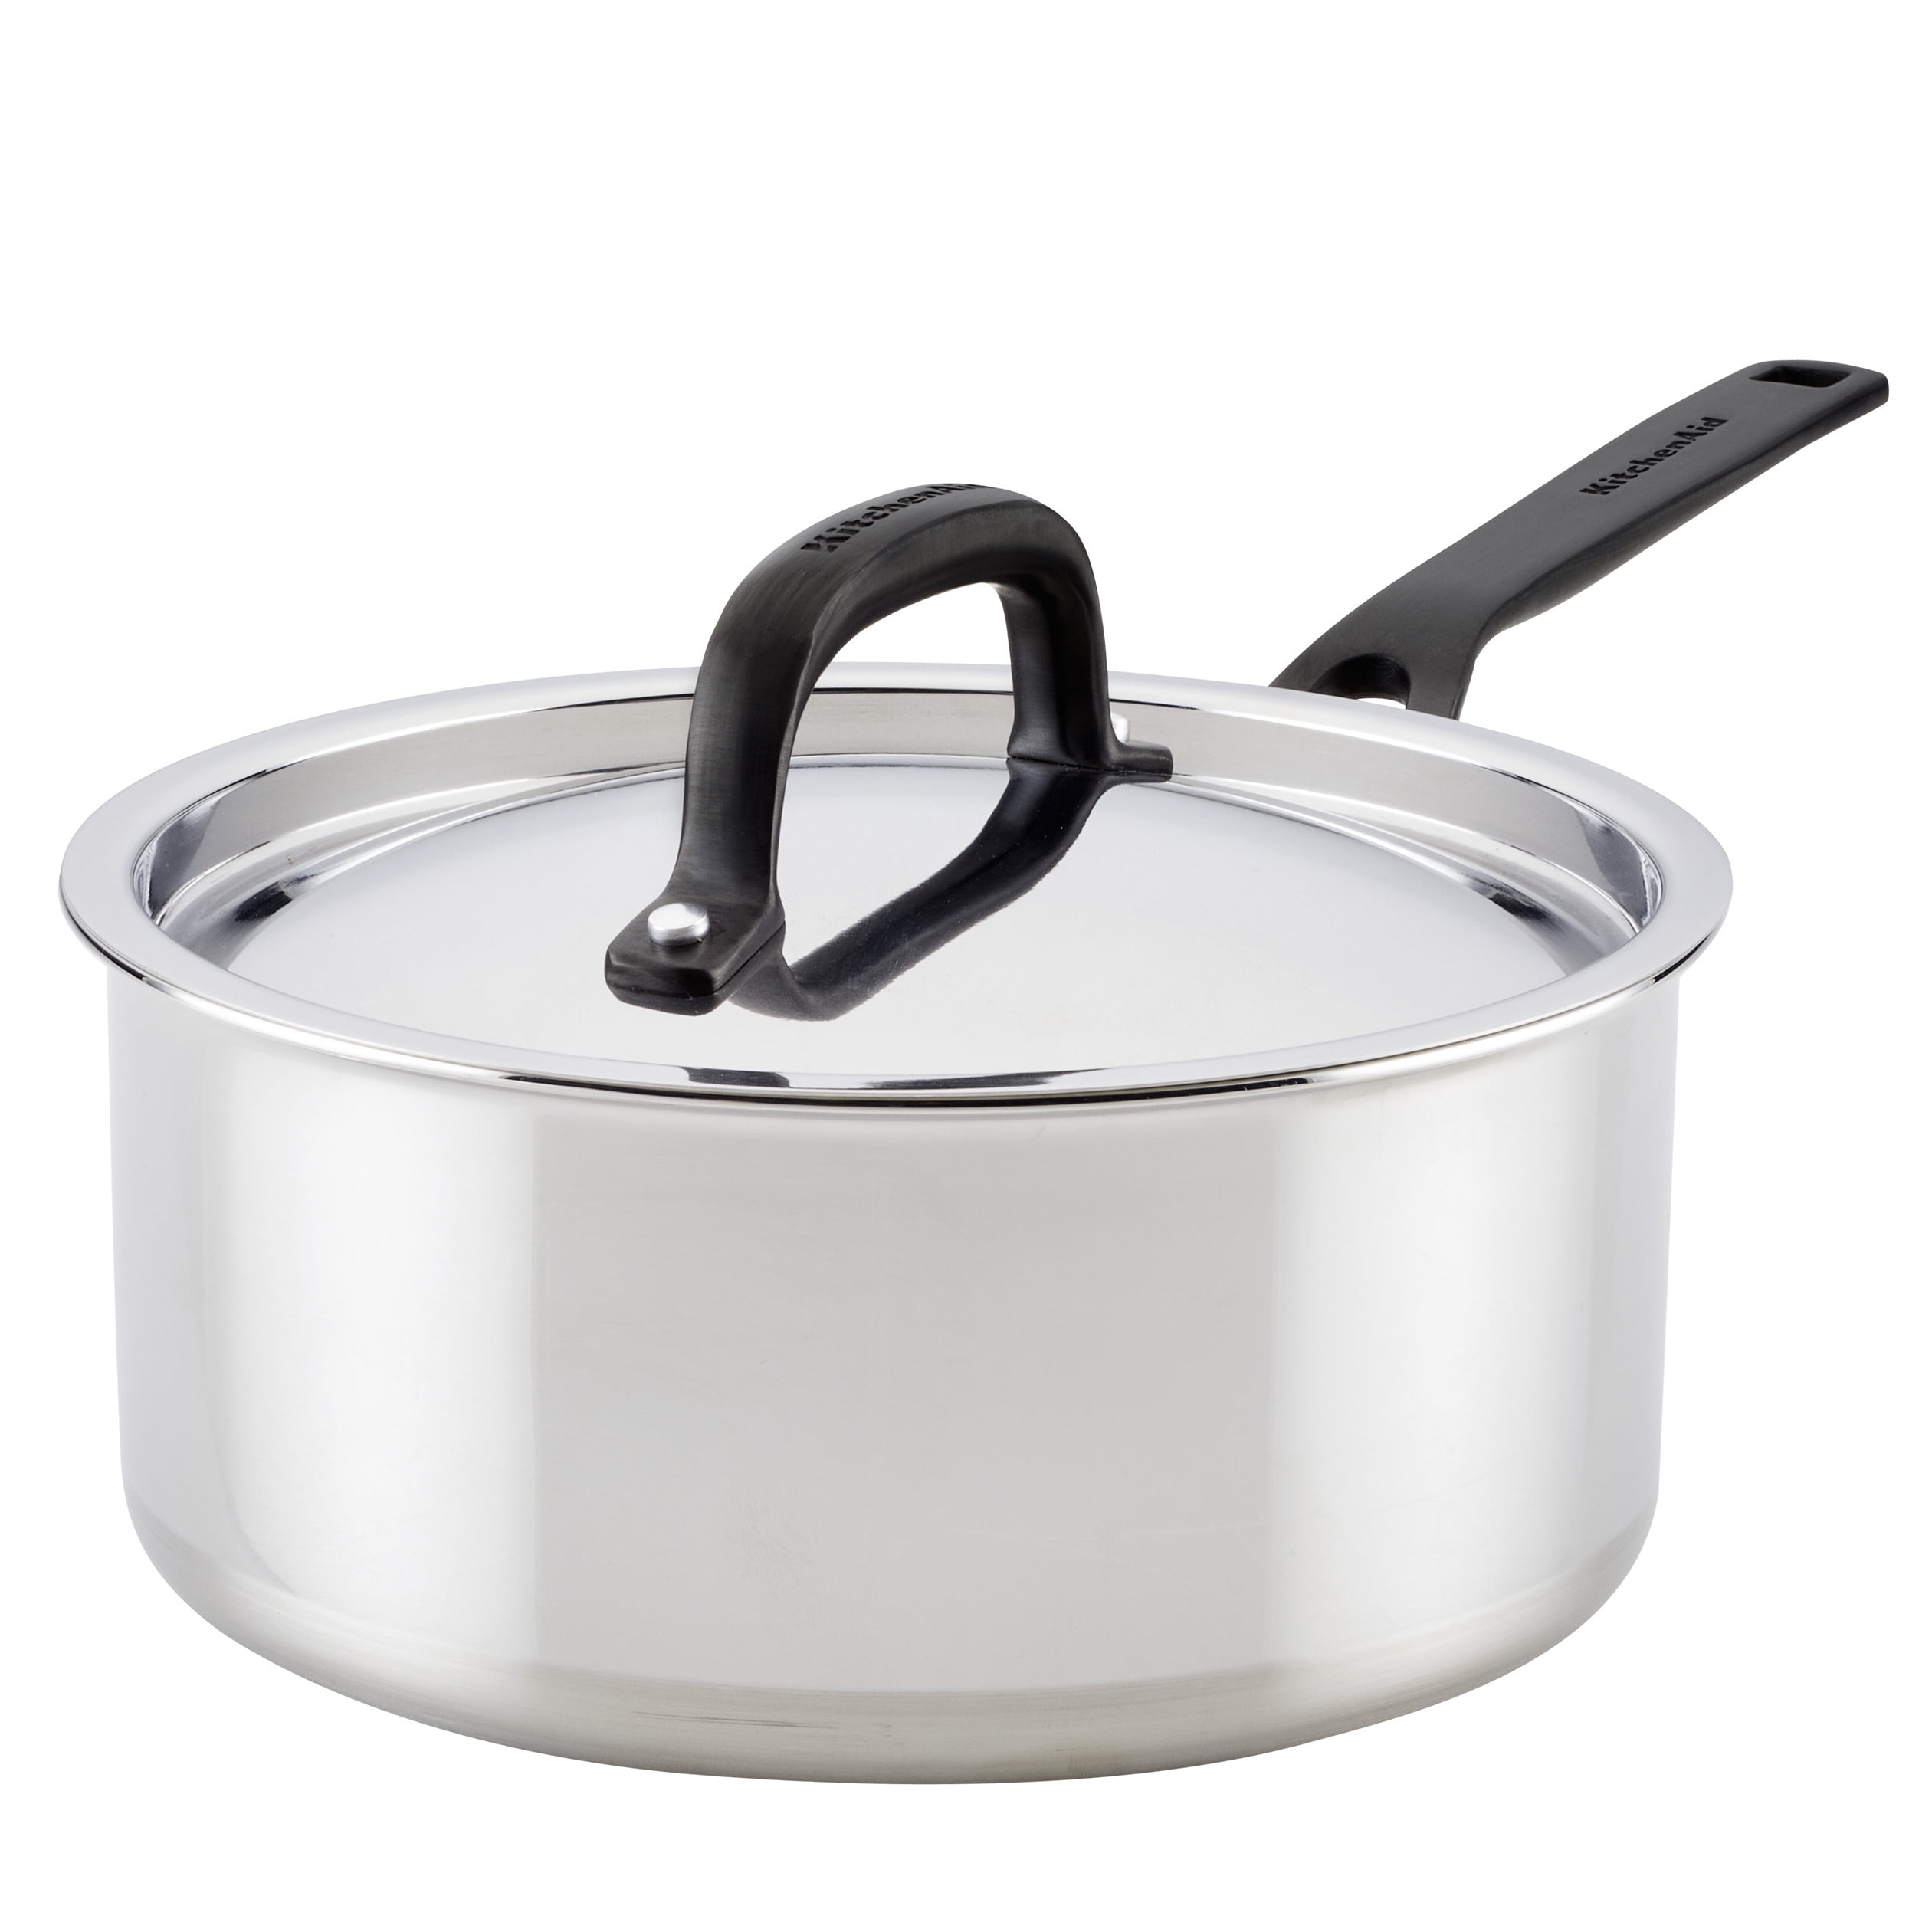 Dishwasher Details about   2 Quart Non-Stick Kitchen Dining Cookware Covered Sauce Pan Stockpot 